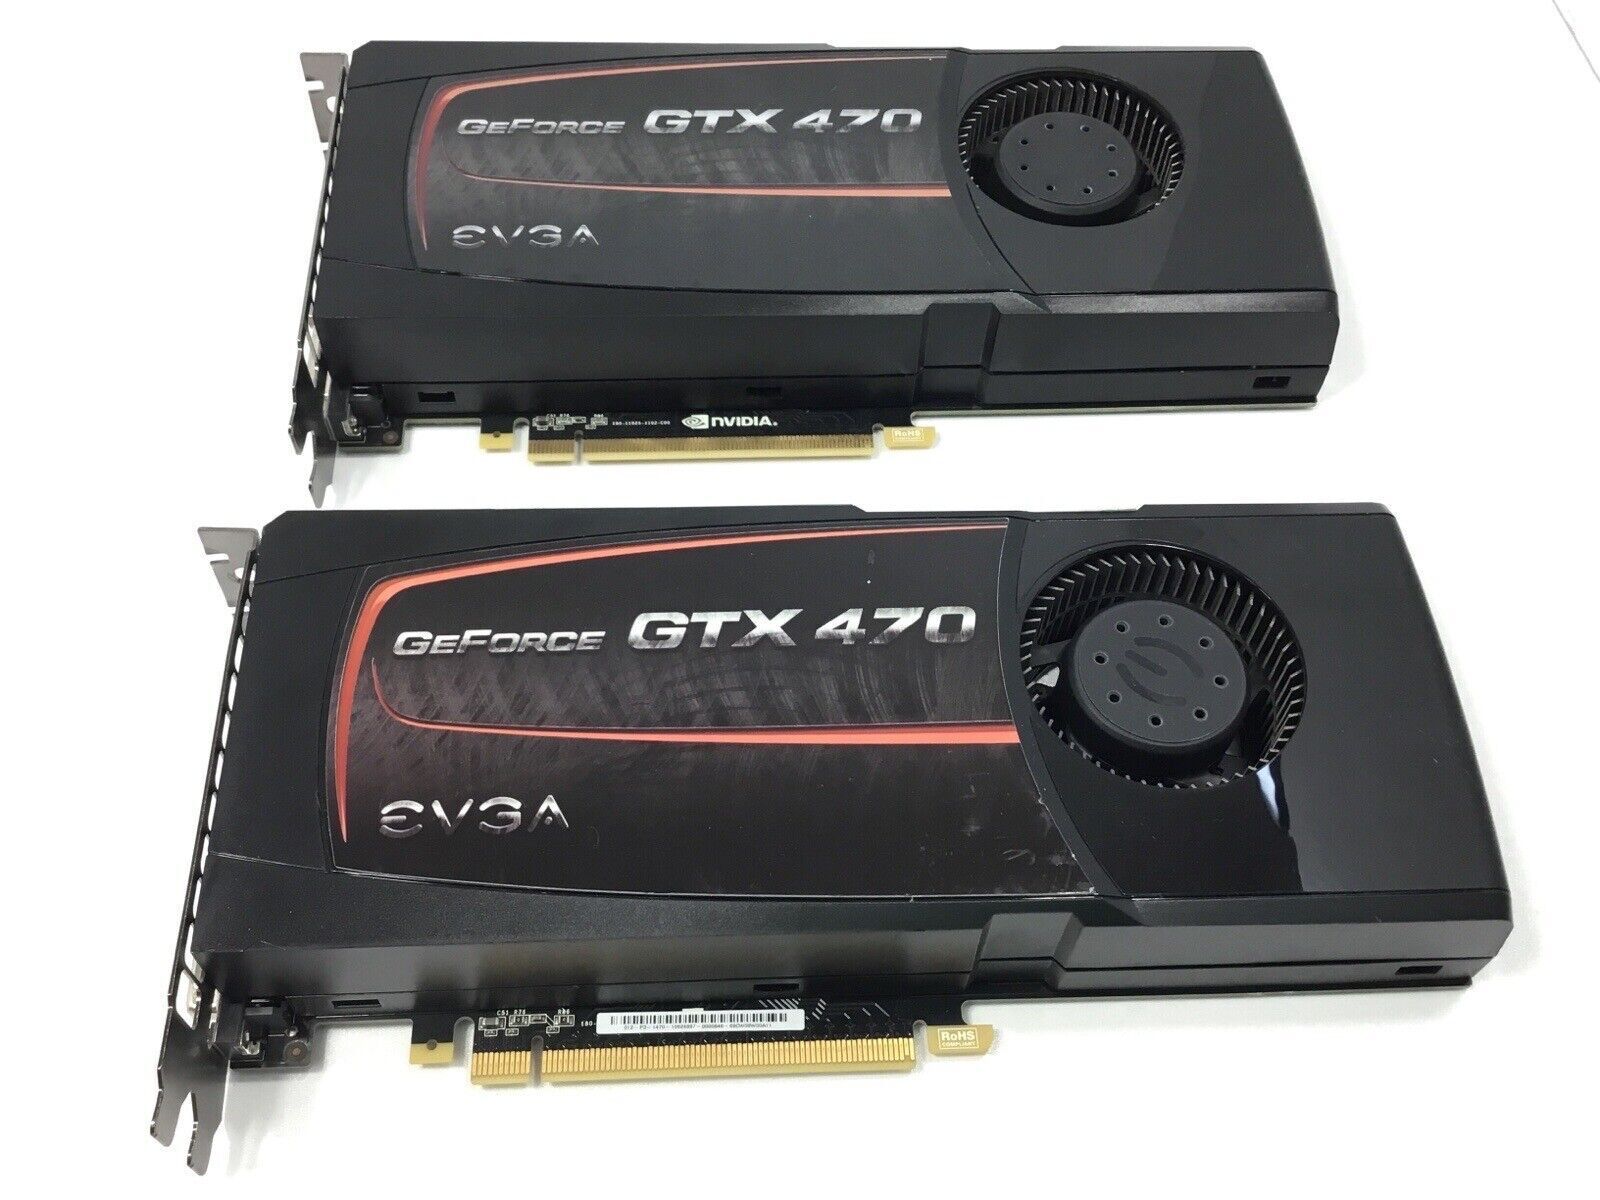 2 - EVGA Nvidia GeForce Graphics Cards GTX 470 For Parts or Rebuild